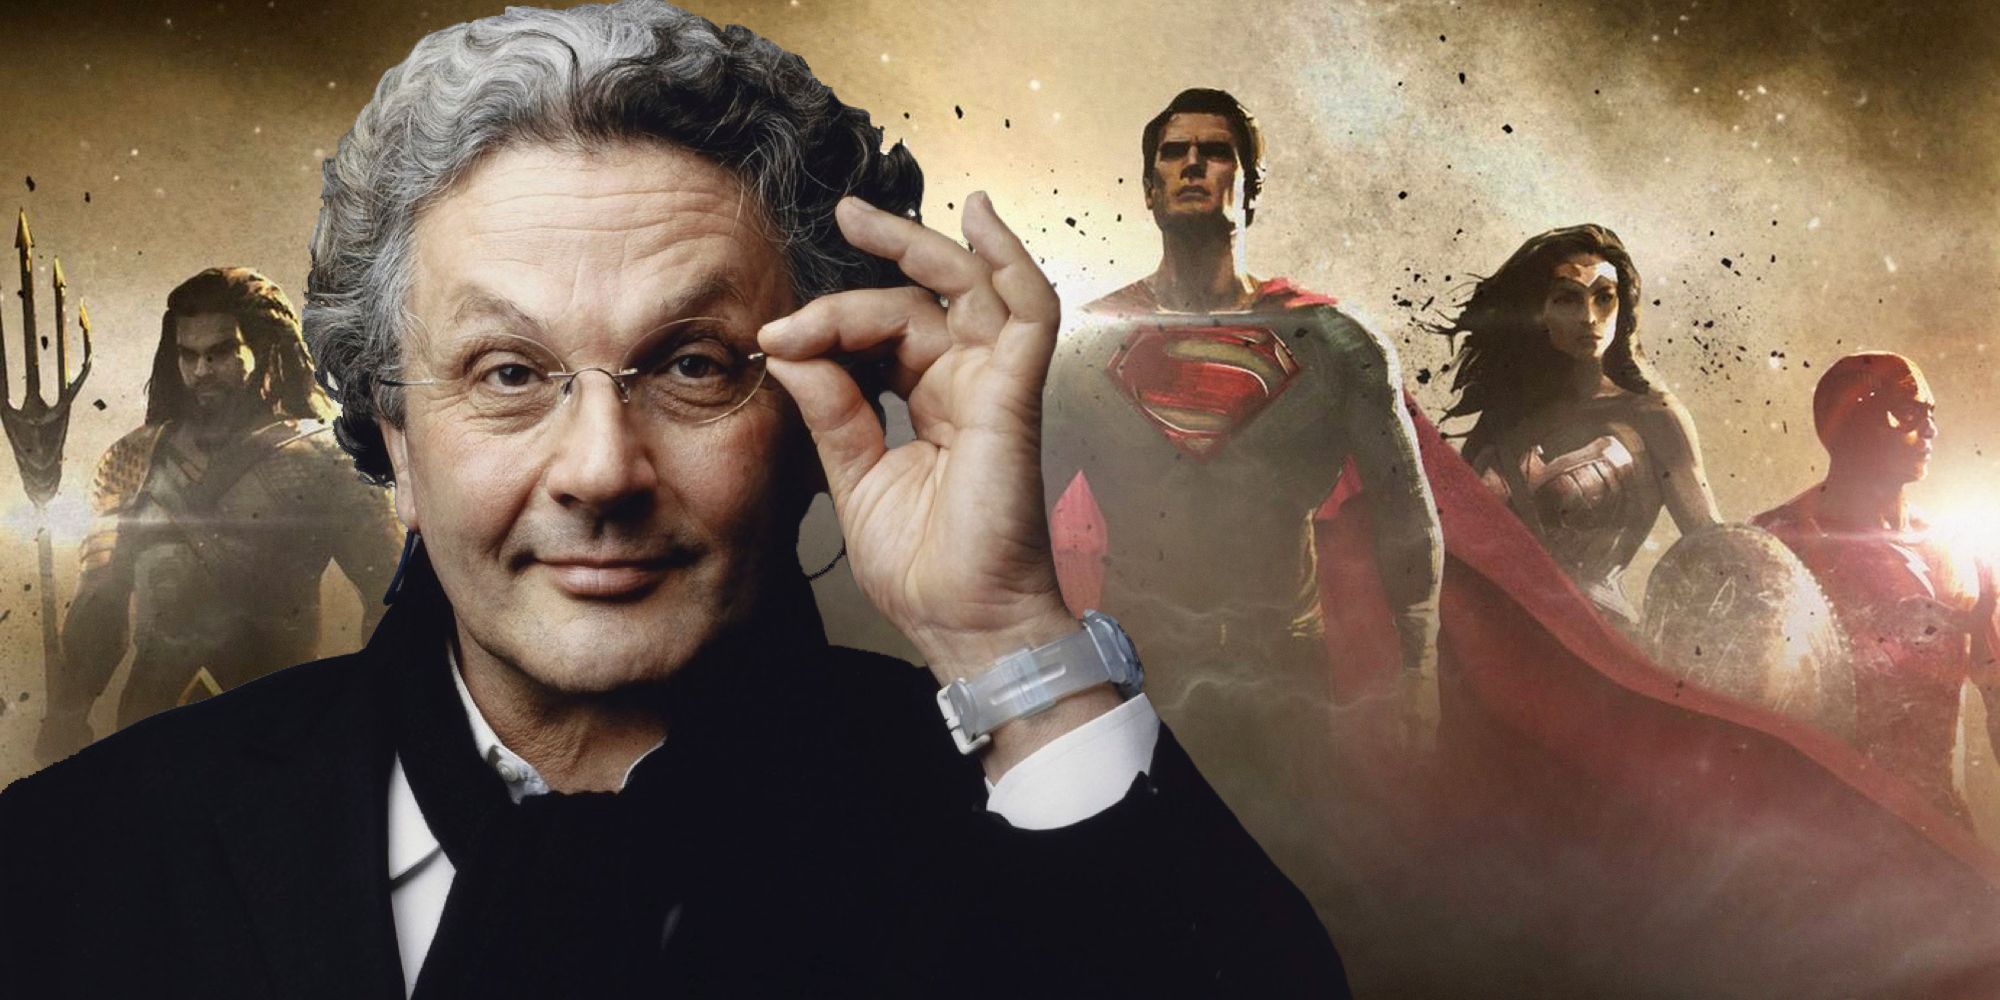 George Miller and the canceled Justice League Mortal movie.